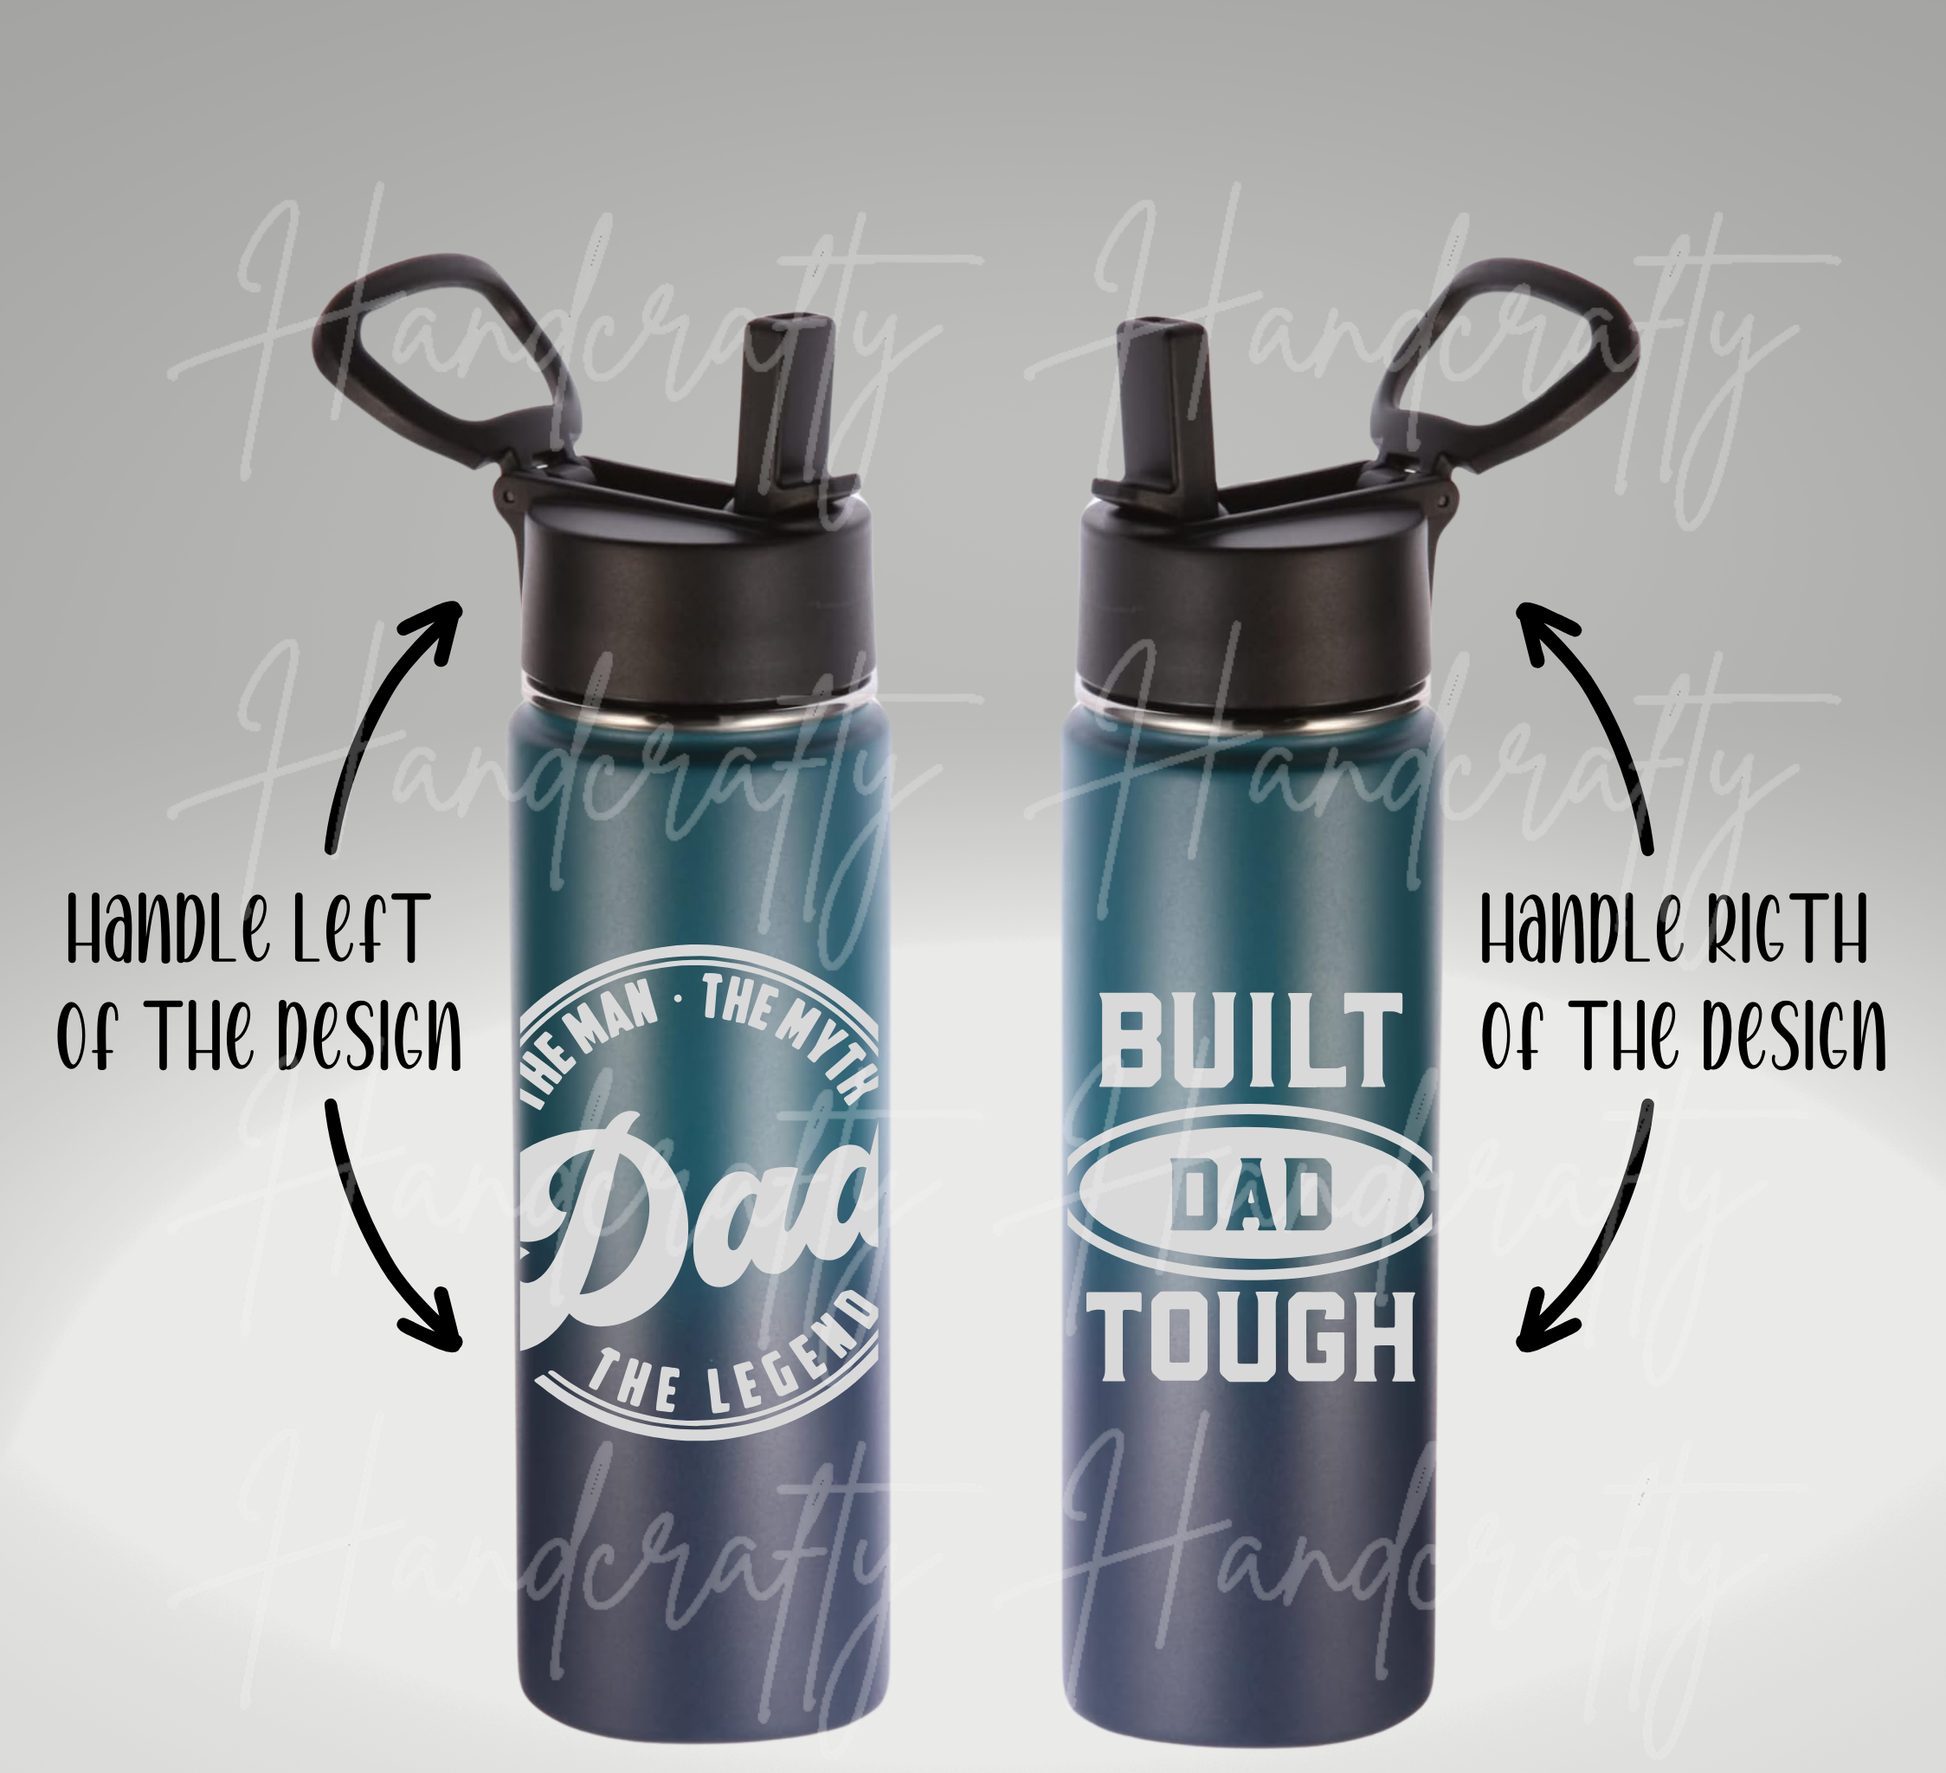 Father's Day water bottle, Father's Day gifts, Insulated water bottle for Dad, Stainless steel water bottle for Dad, Double wall water bottle for Dad, Powder coated water bottle for Dad, Double wall insulated water bottle, Vacuum insulated water bottl, Laser engraved water bottle, Durable  BPA-free water bottle, Leak-proof water bottle, Spill-proof water bottle, Thermal water bottle for Dad, Best Dad water bottle, World's Best Dad water bottle, Super Dad water bottle, #1 Dad water bottle